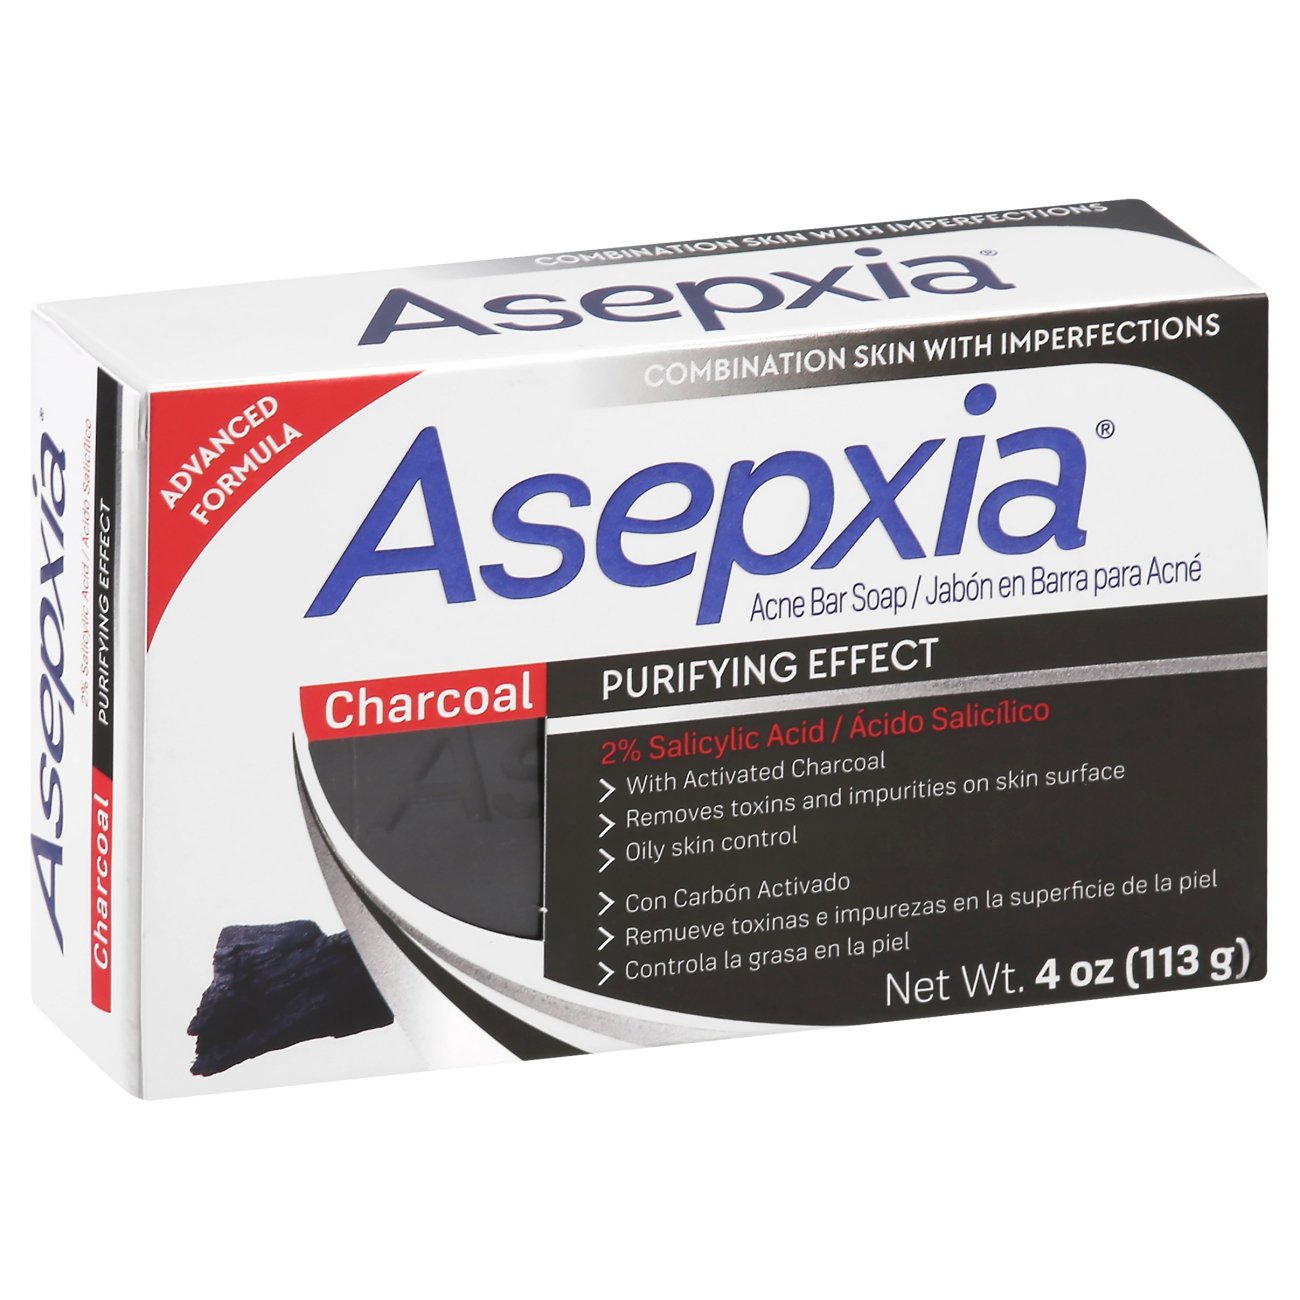 Asepxia Acne Bar Soap with Charcoal - Shop Cleansers & Scrubs at H-E-B